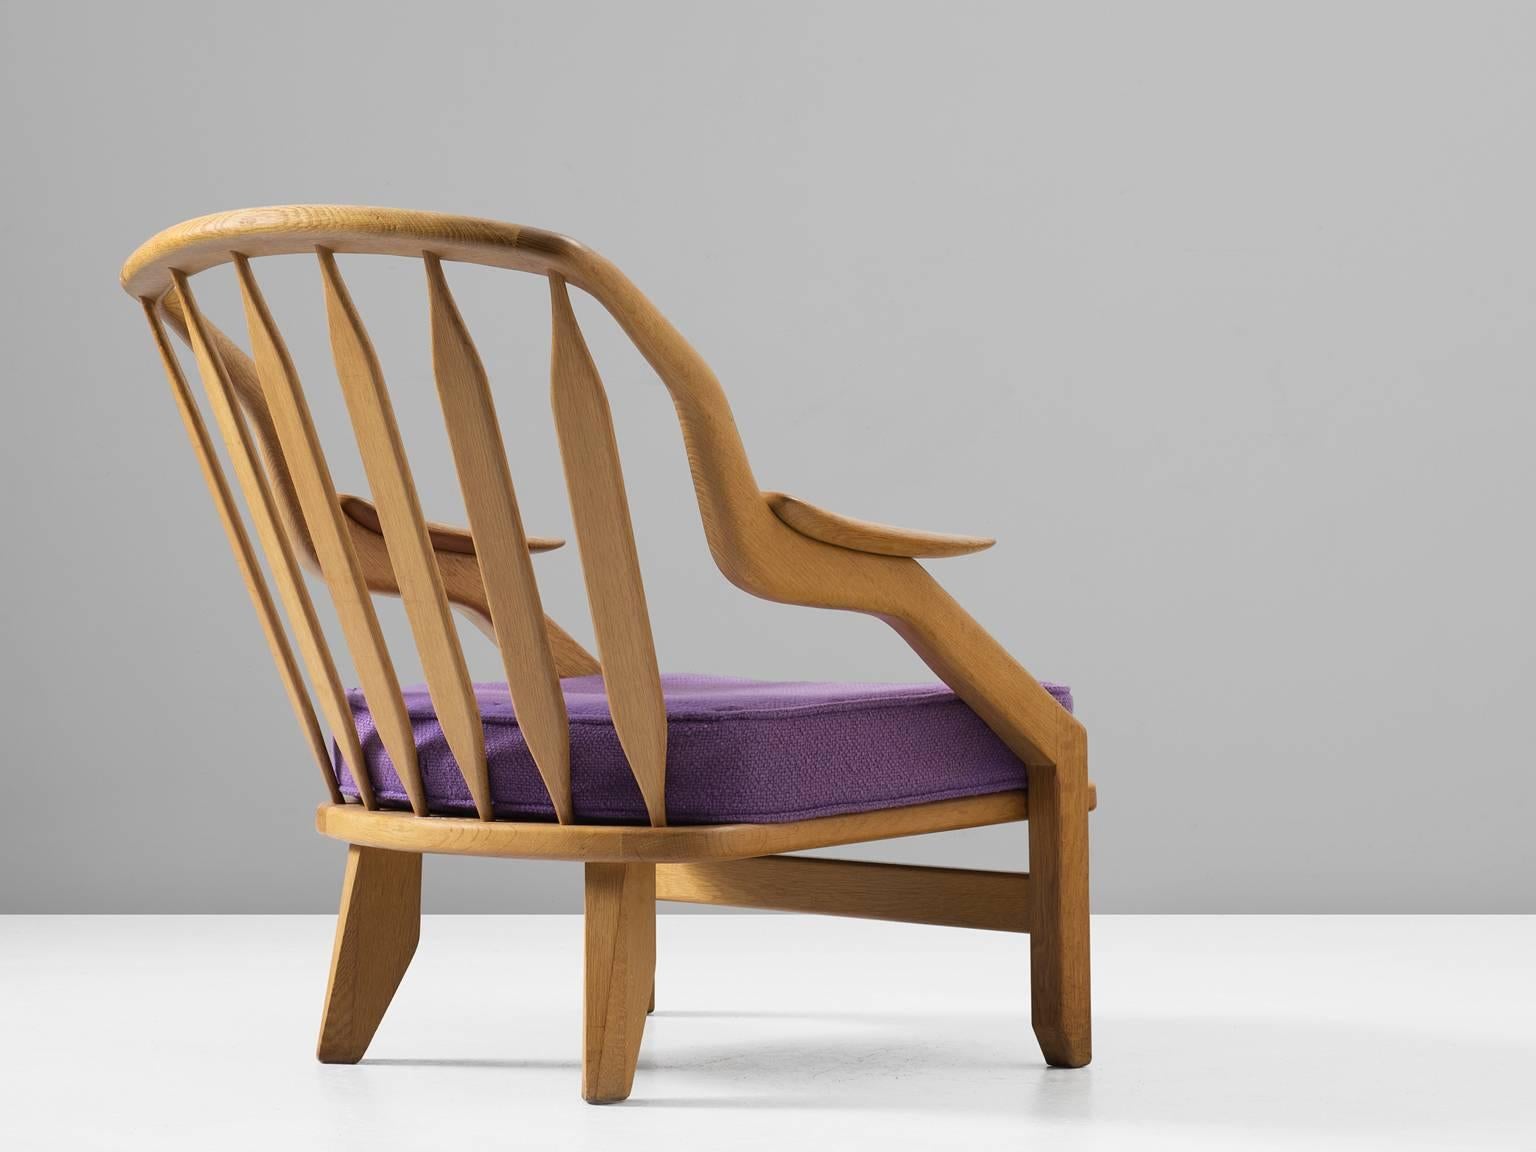 French Guillerme & Chambron Lounge Chair in Solid Oak and Purple Upholstery